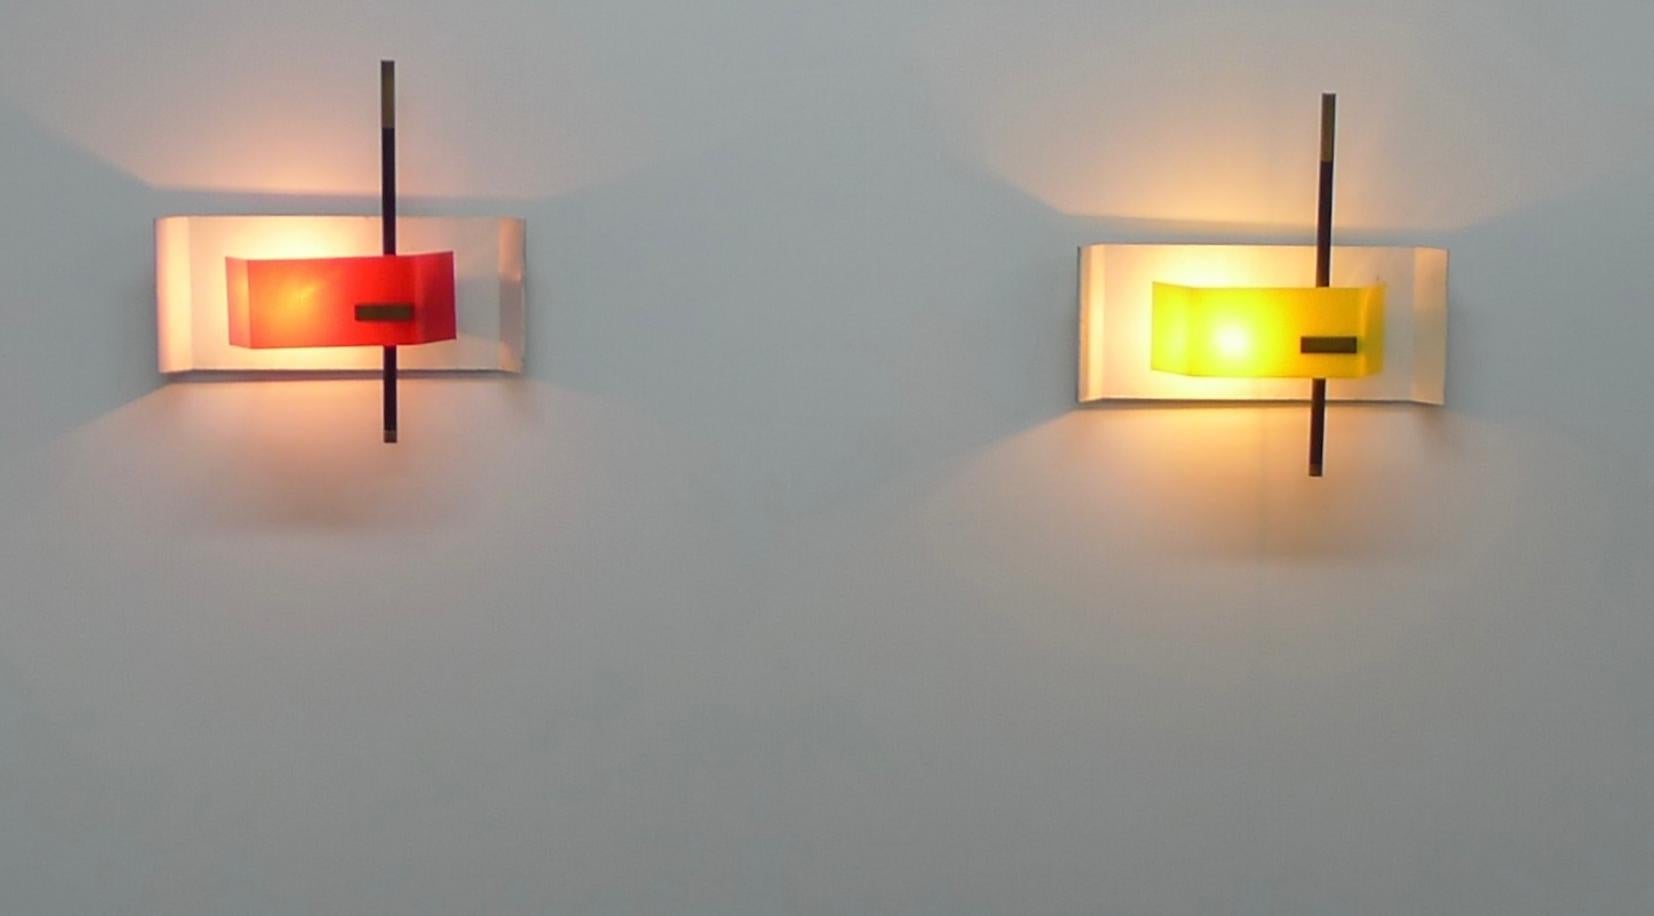 These two Stilnovo wall lights appear to be a variation of model 2020 designed by Bruno Gatta in 1955.

Each plexiglass diffuser, one yellow and one red, is decorated with a brass plaque and is moveable to allow replacement of the bulb.  The light